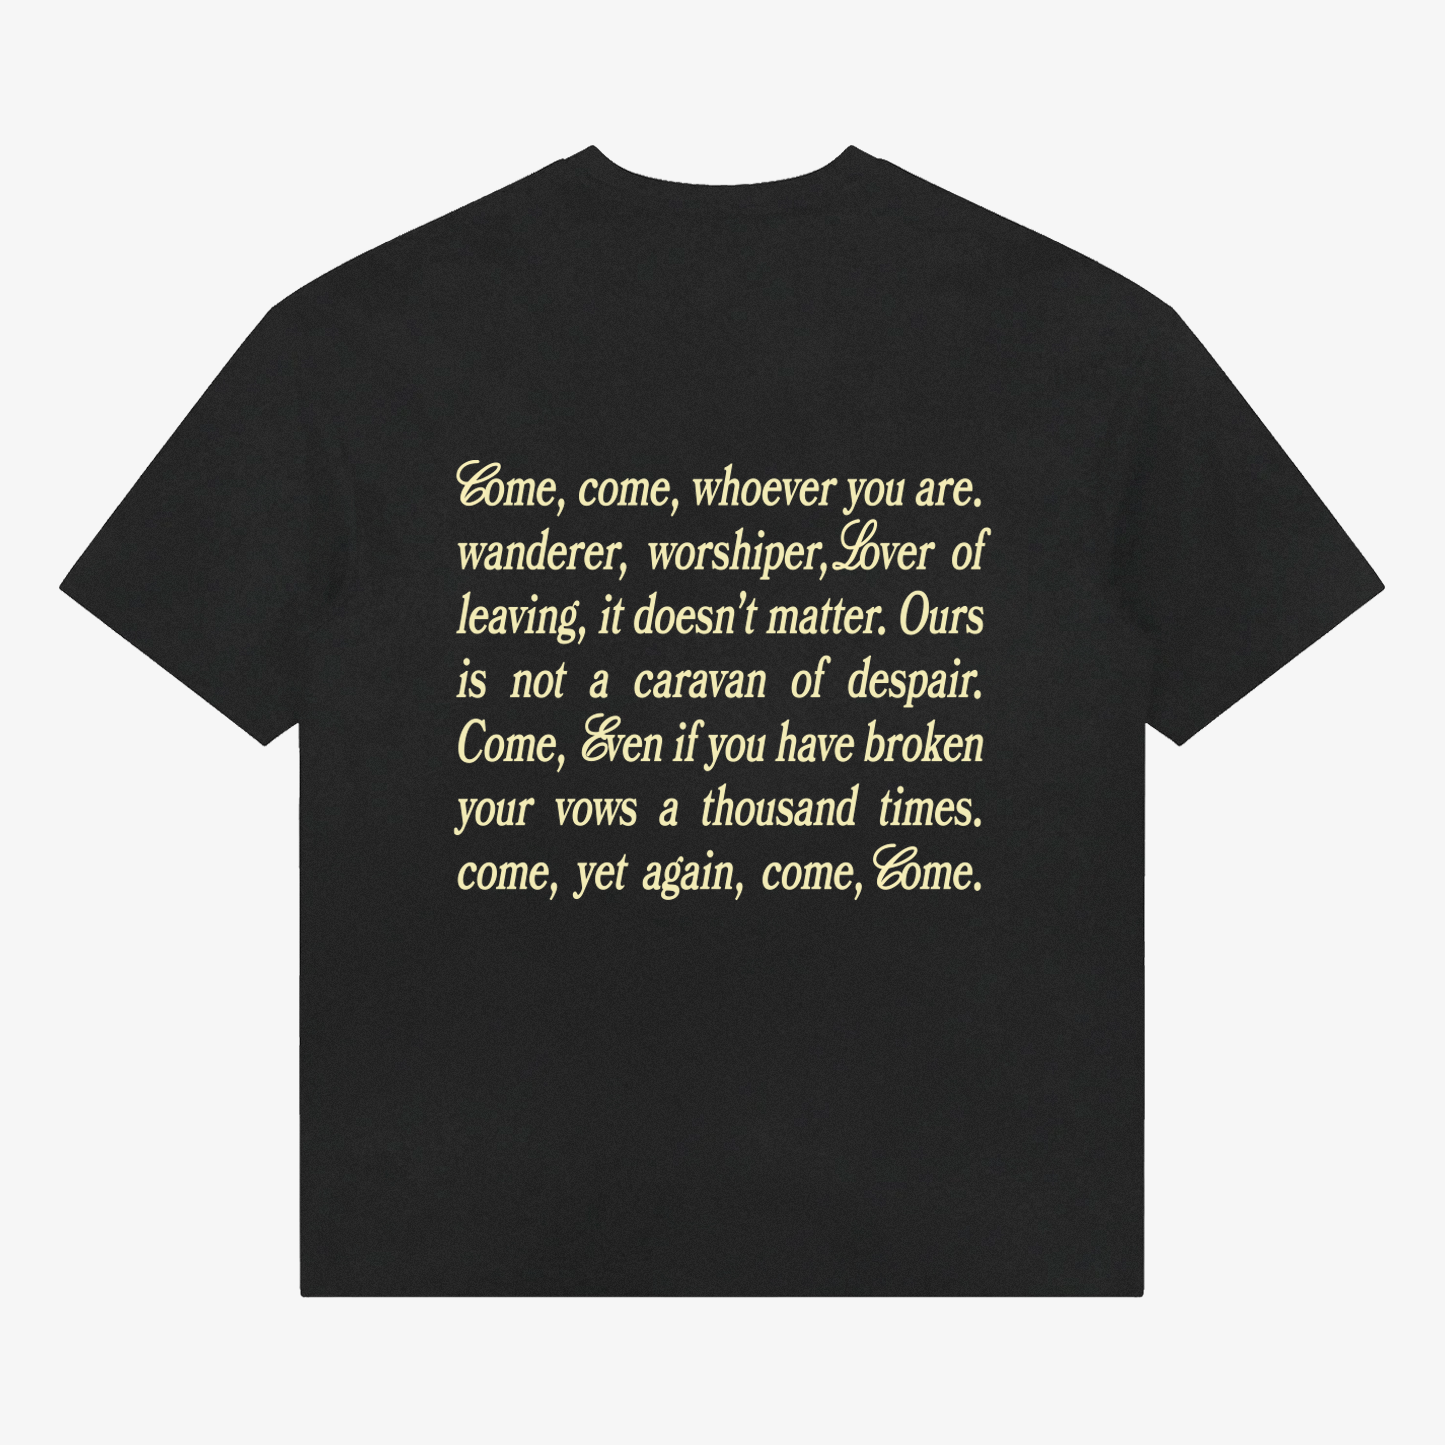 Come Home Tee - Washed Black